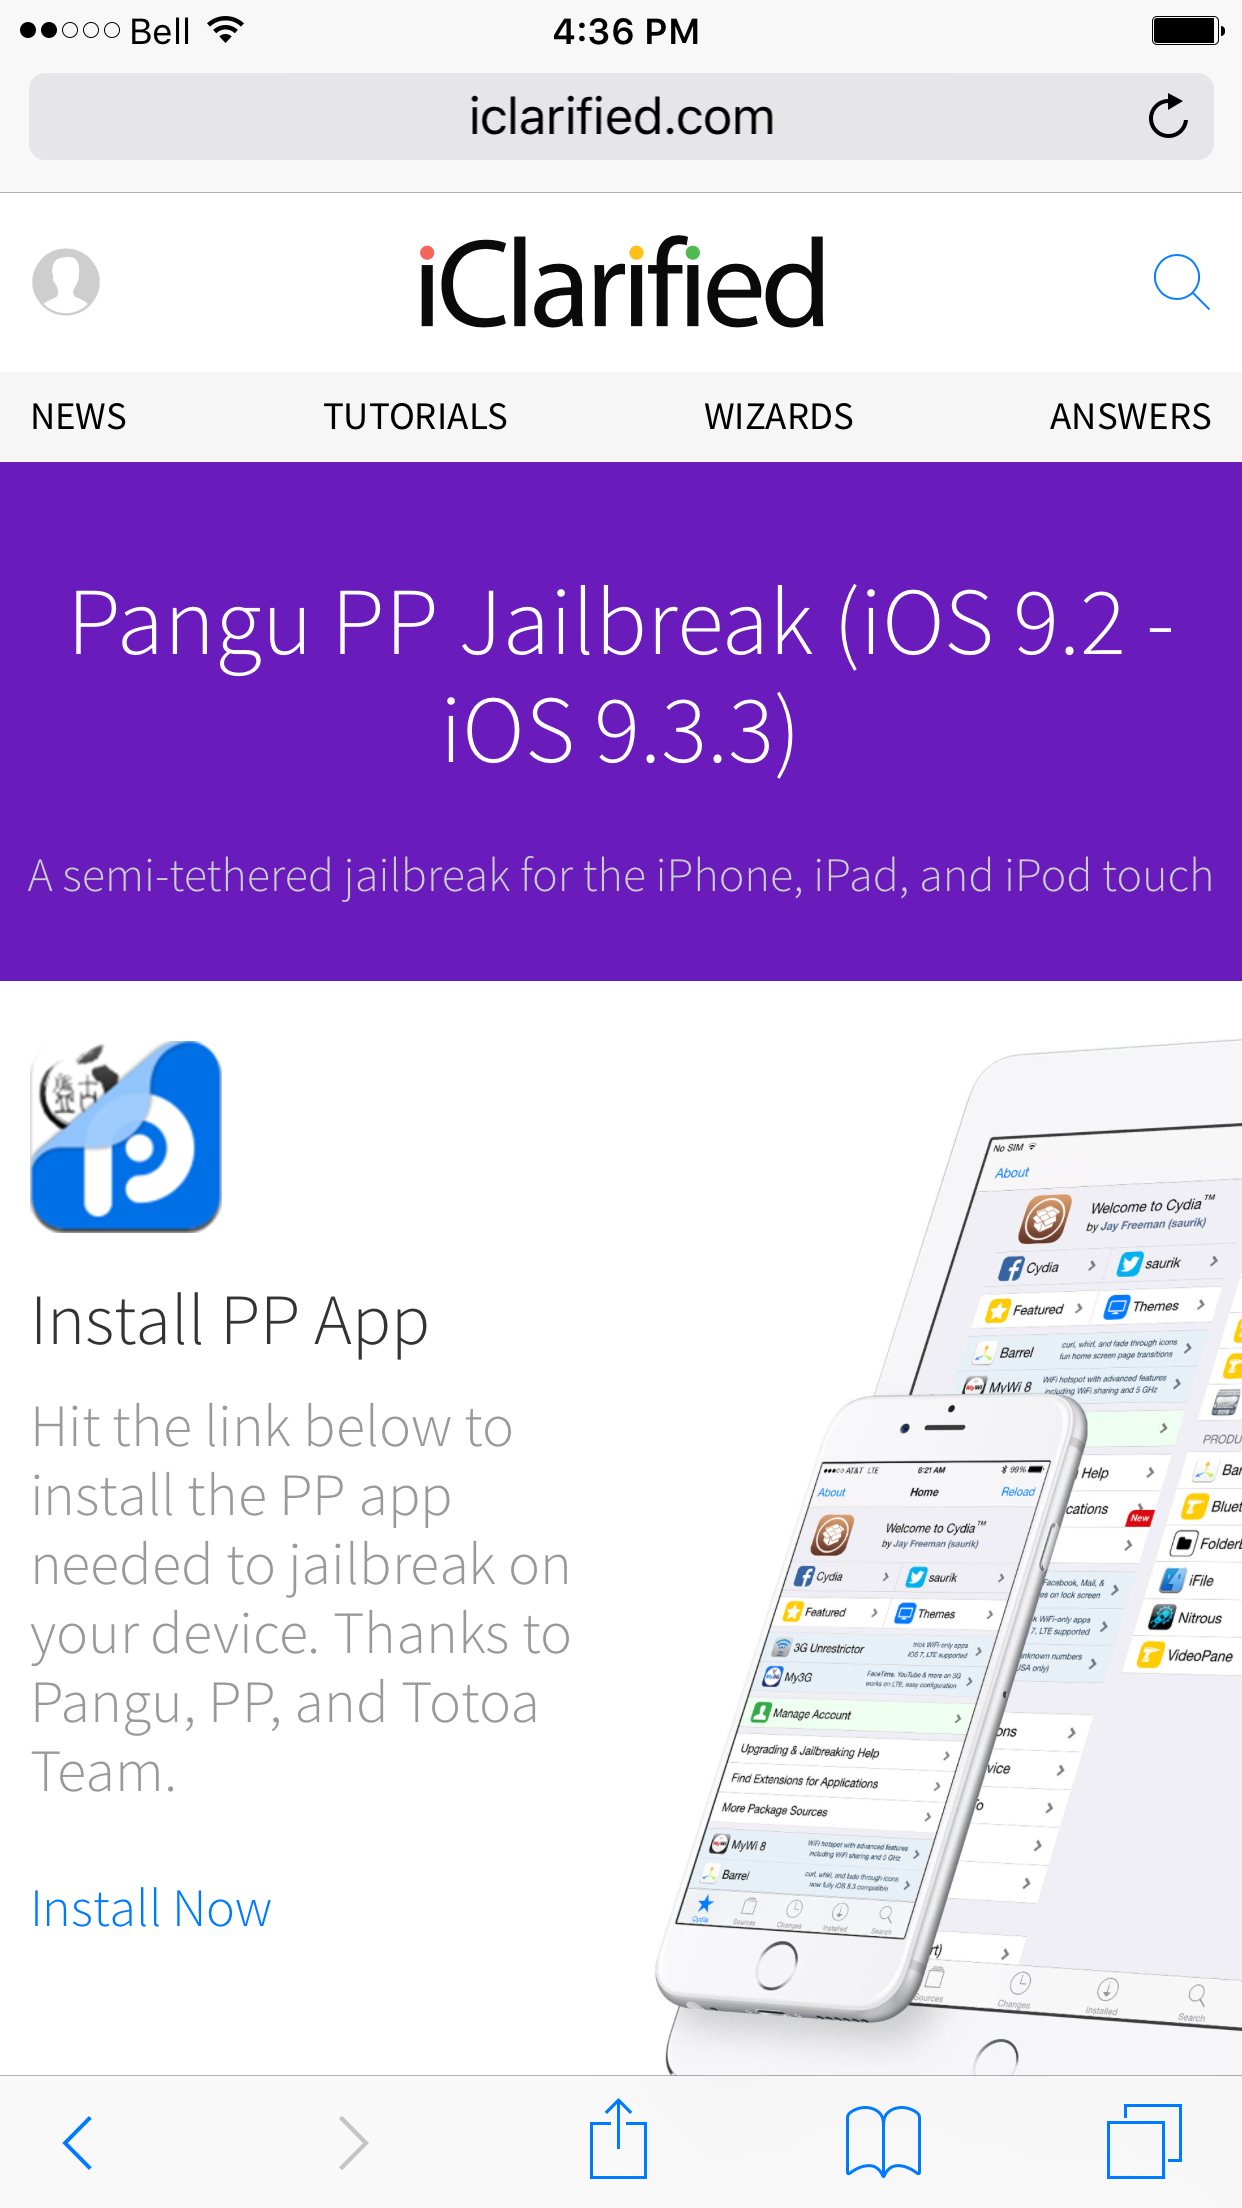 How To Jailbreak Your Iphone On Ios 9 2 9 3 3 Without A Computer Iclarified